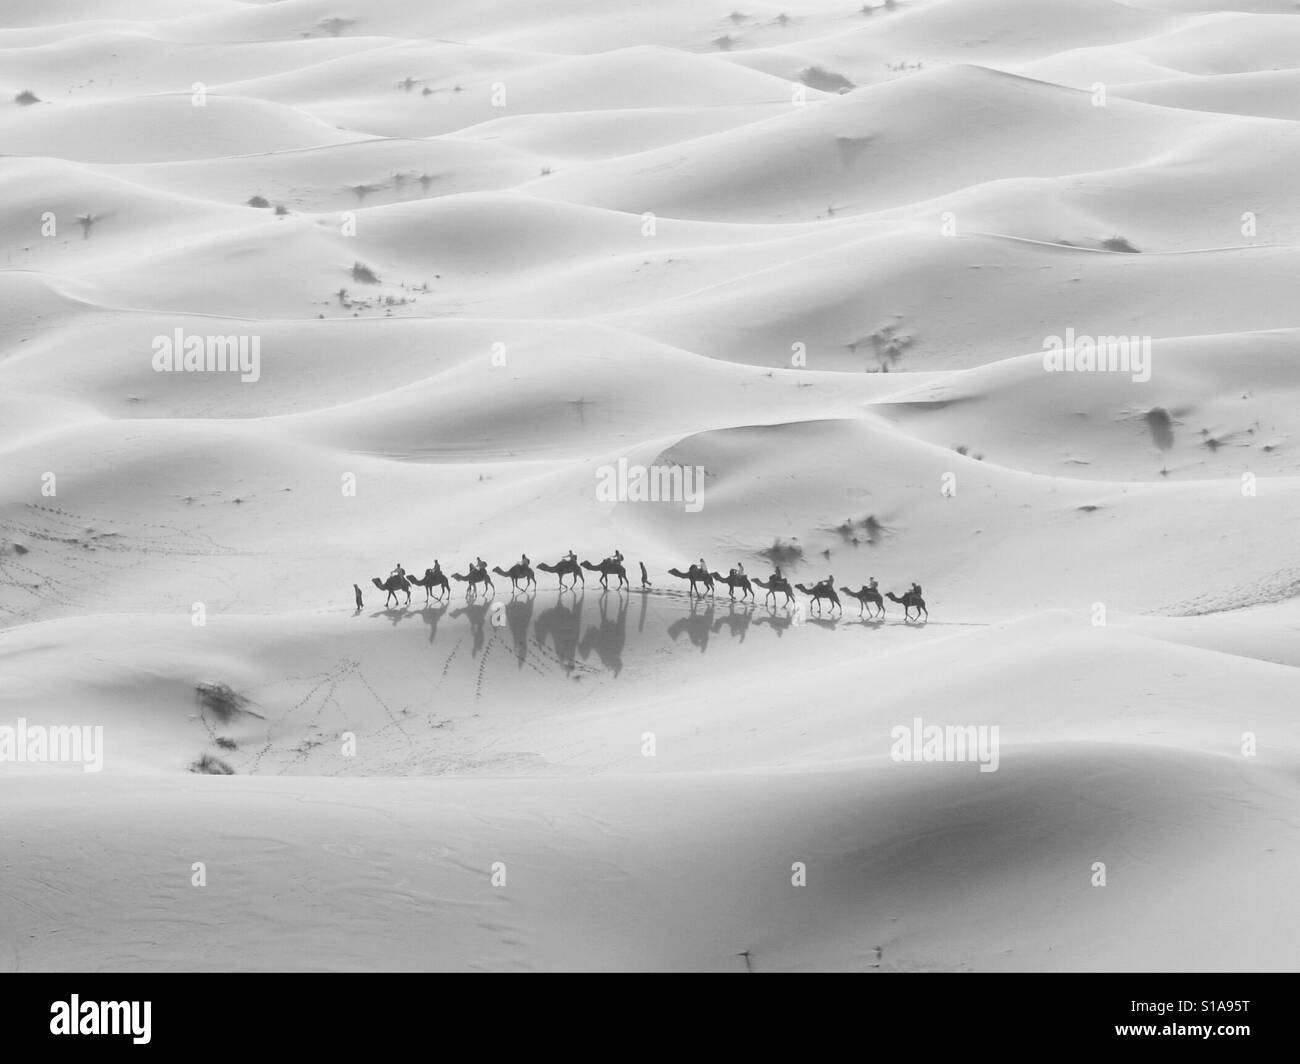 Caravan of camels in the Sahara black and white Stock Photo